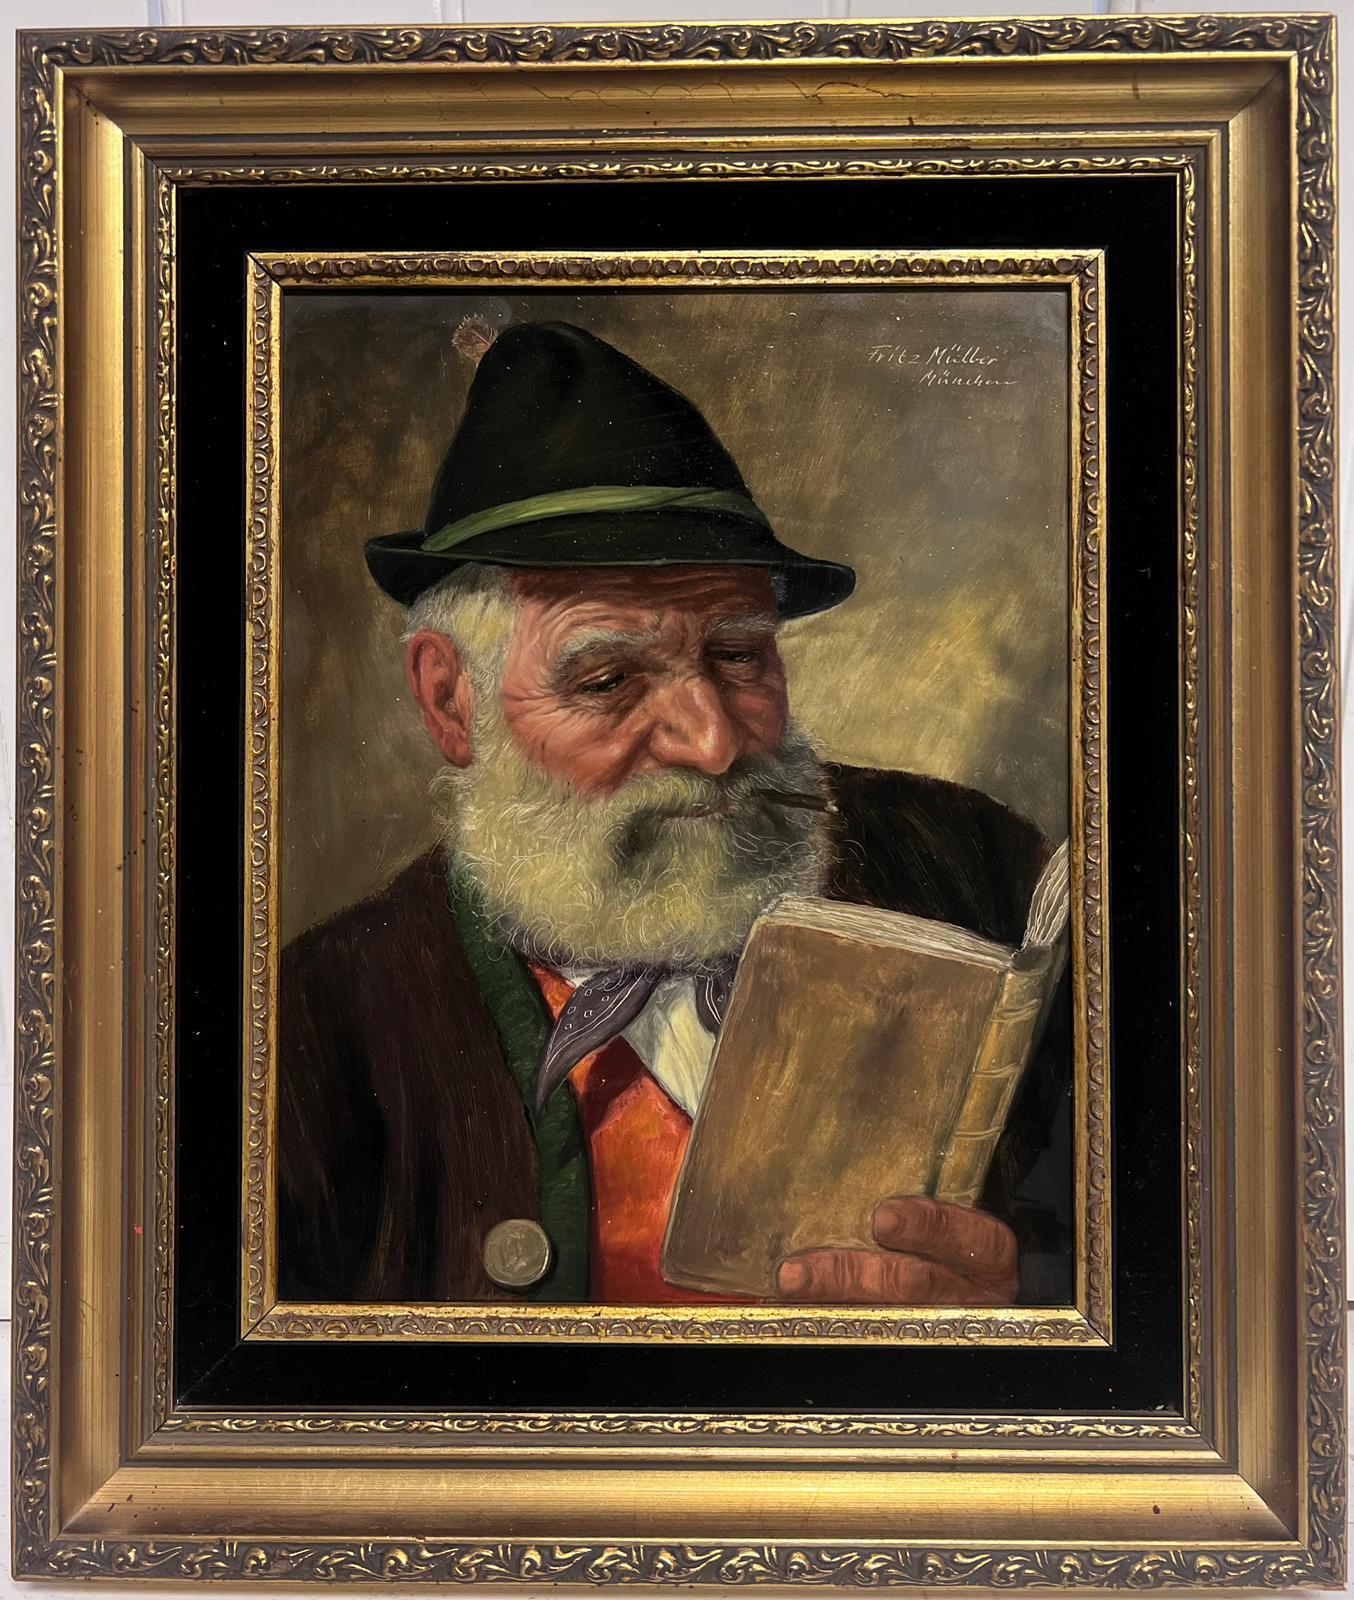 Fine German Portrait of Elderly Man with Beard Enjoying a Smoke and Reading Book - Painting by Fritz Muller